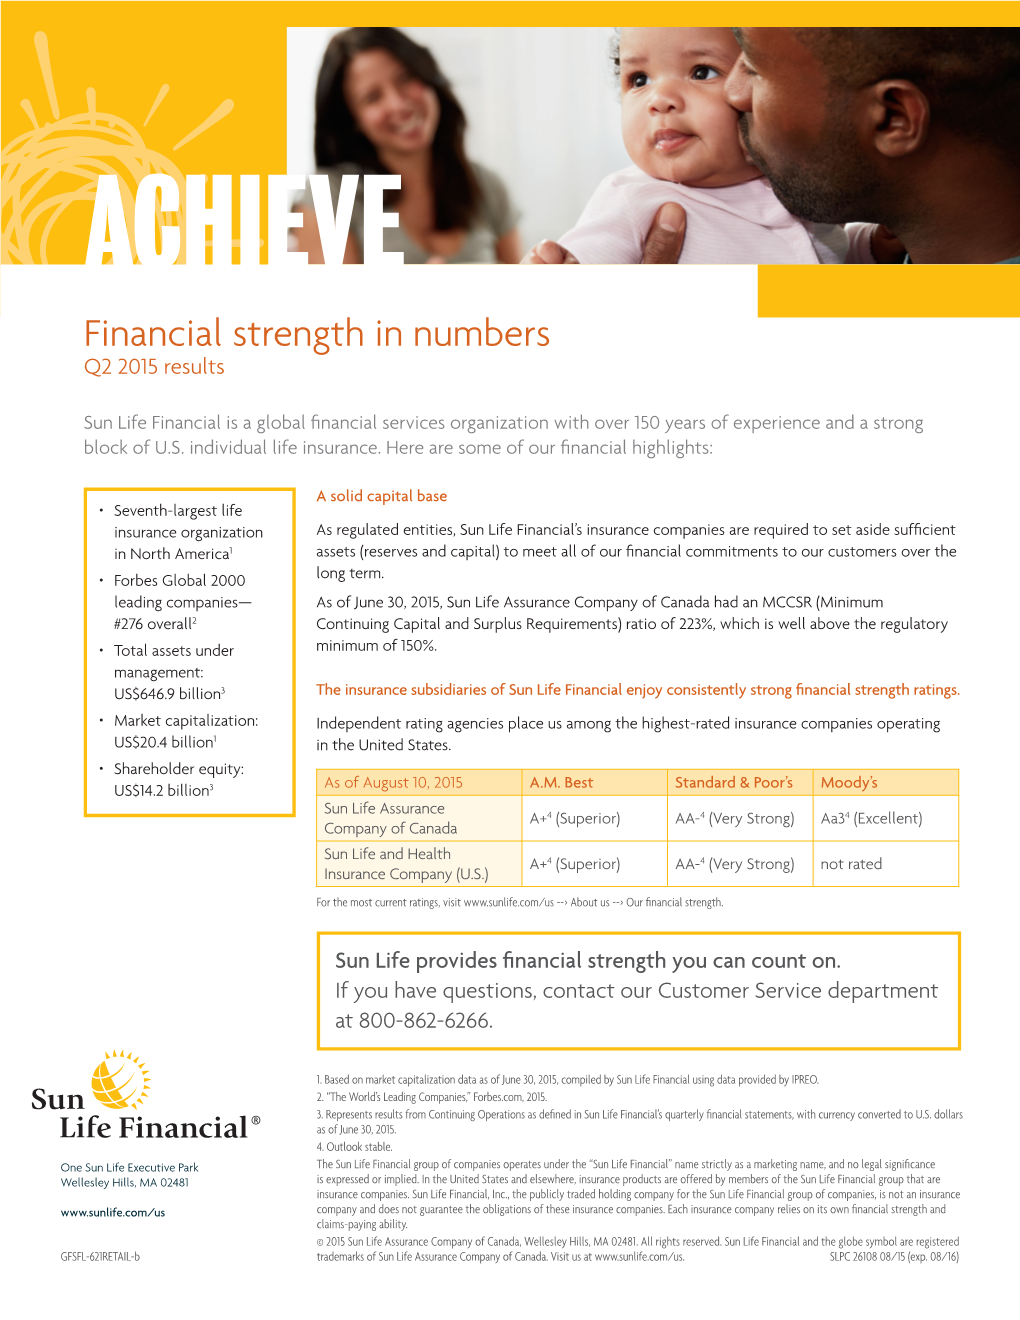 Financial Strength in Numbers Q2 2015 Results